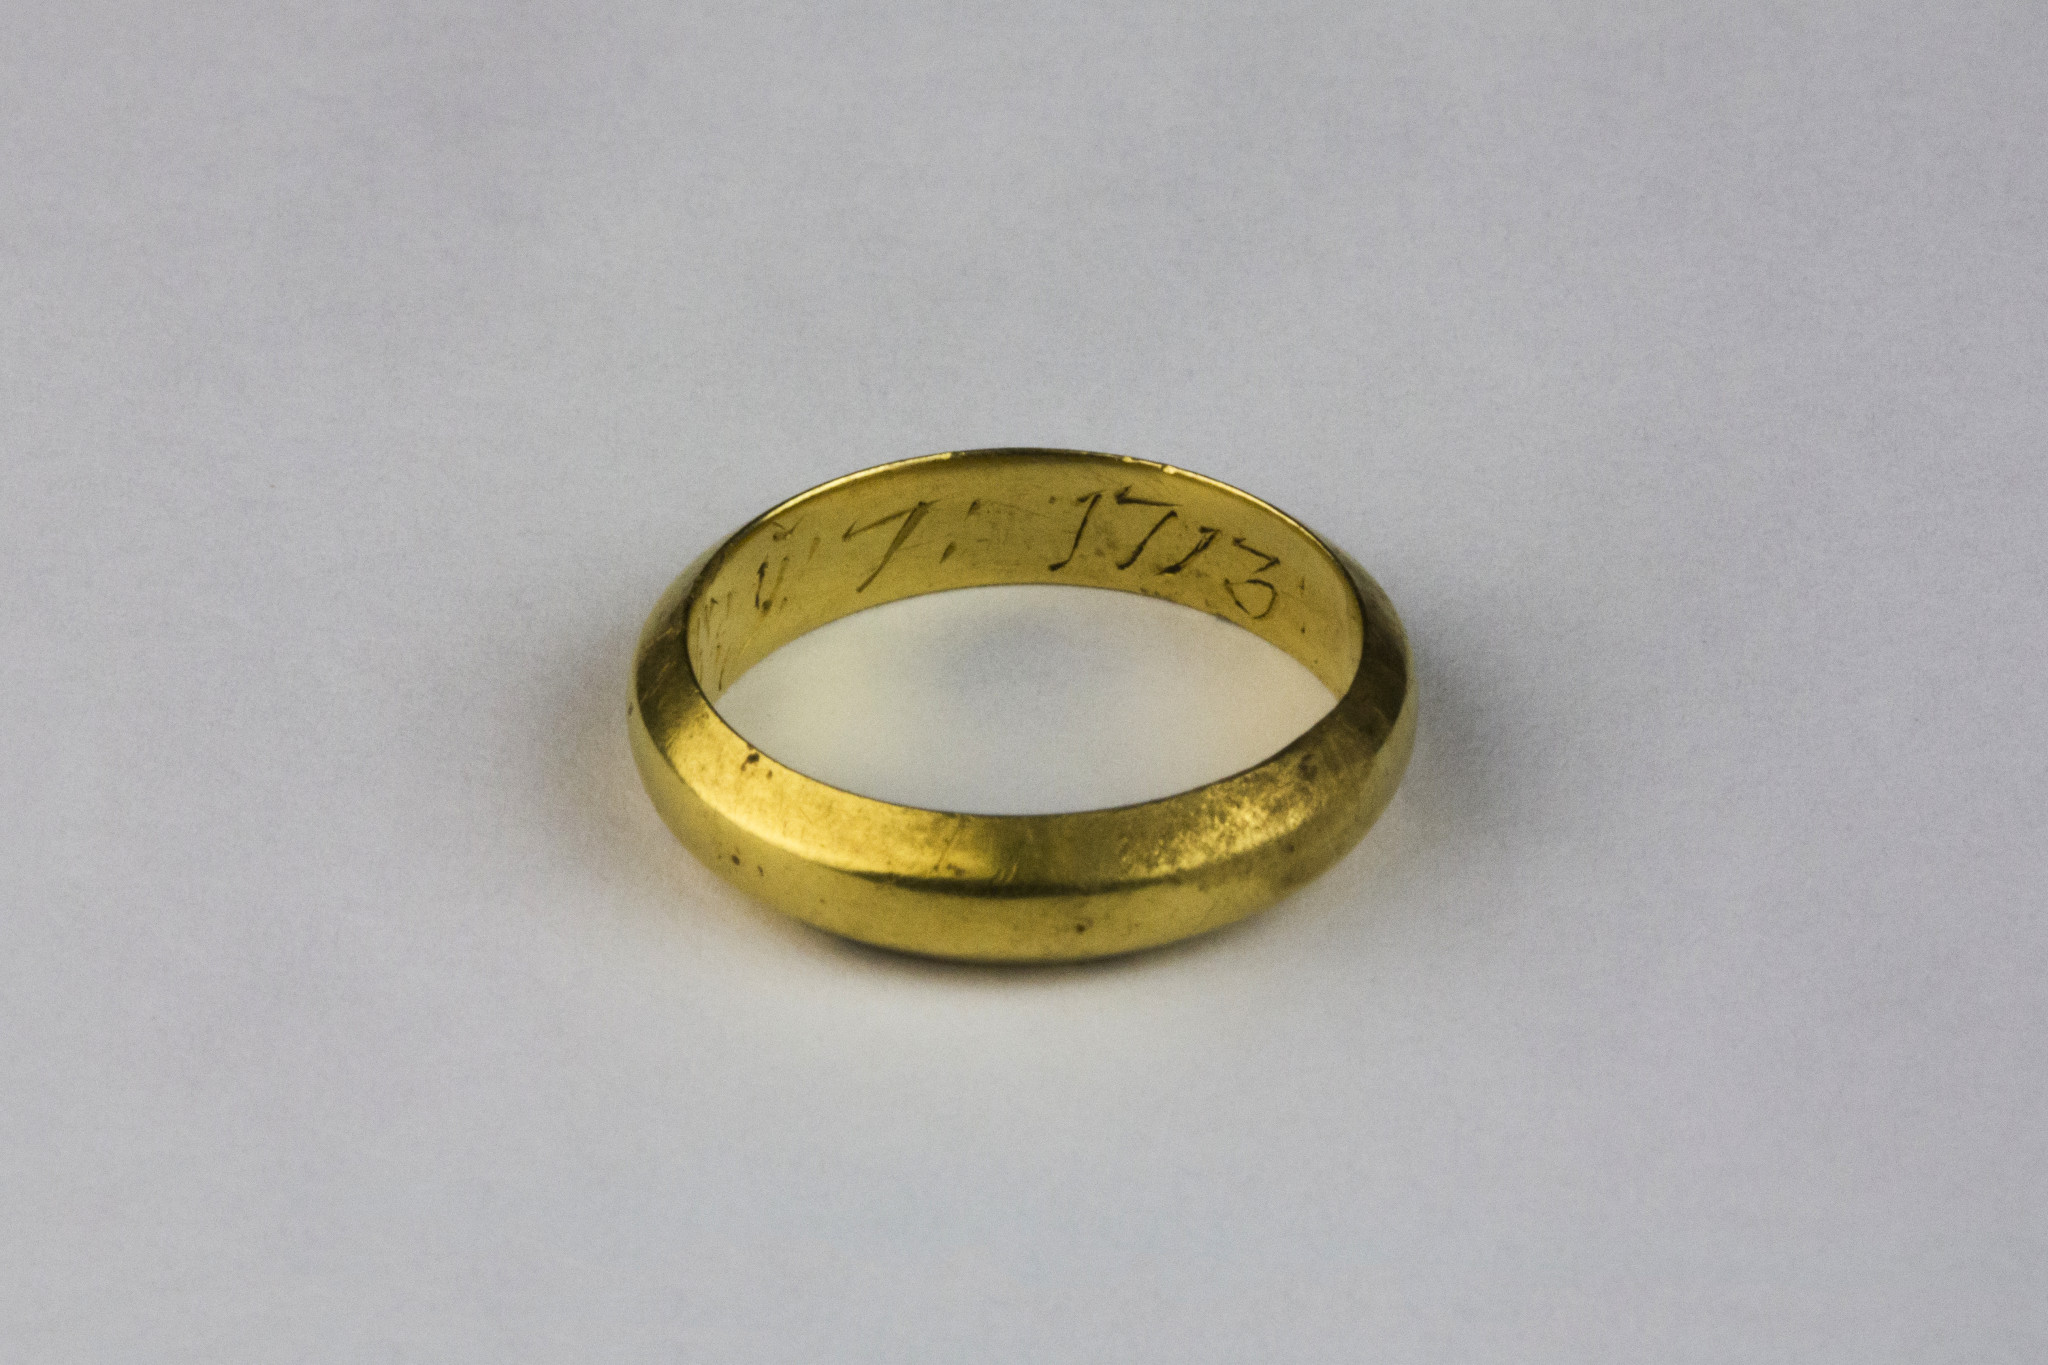 Although there have been relatively few finds thus far, one of the nicest was this gold posy ring. This image shows the year '1713' inscribed inside it (Copyright Rubicon Heritage)